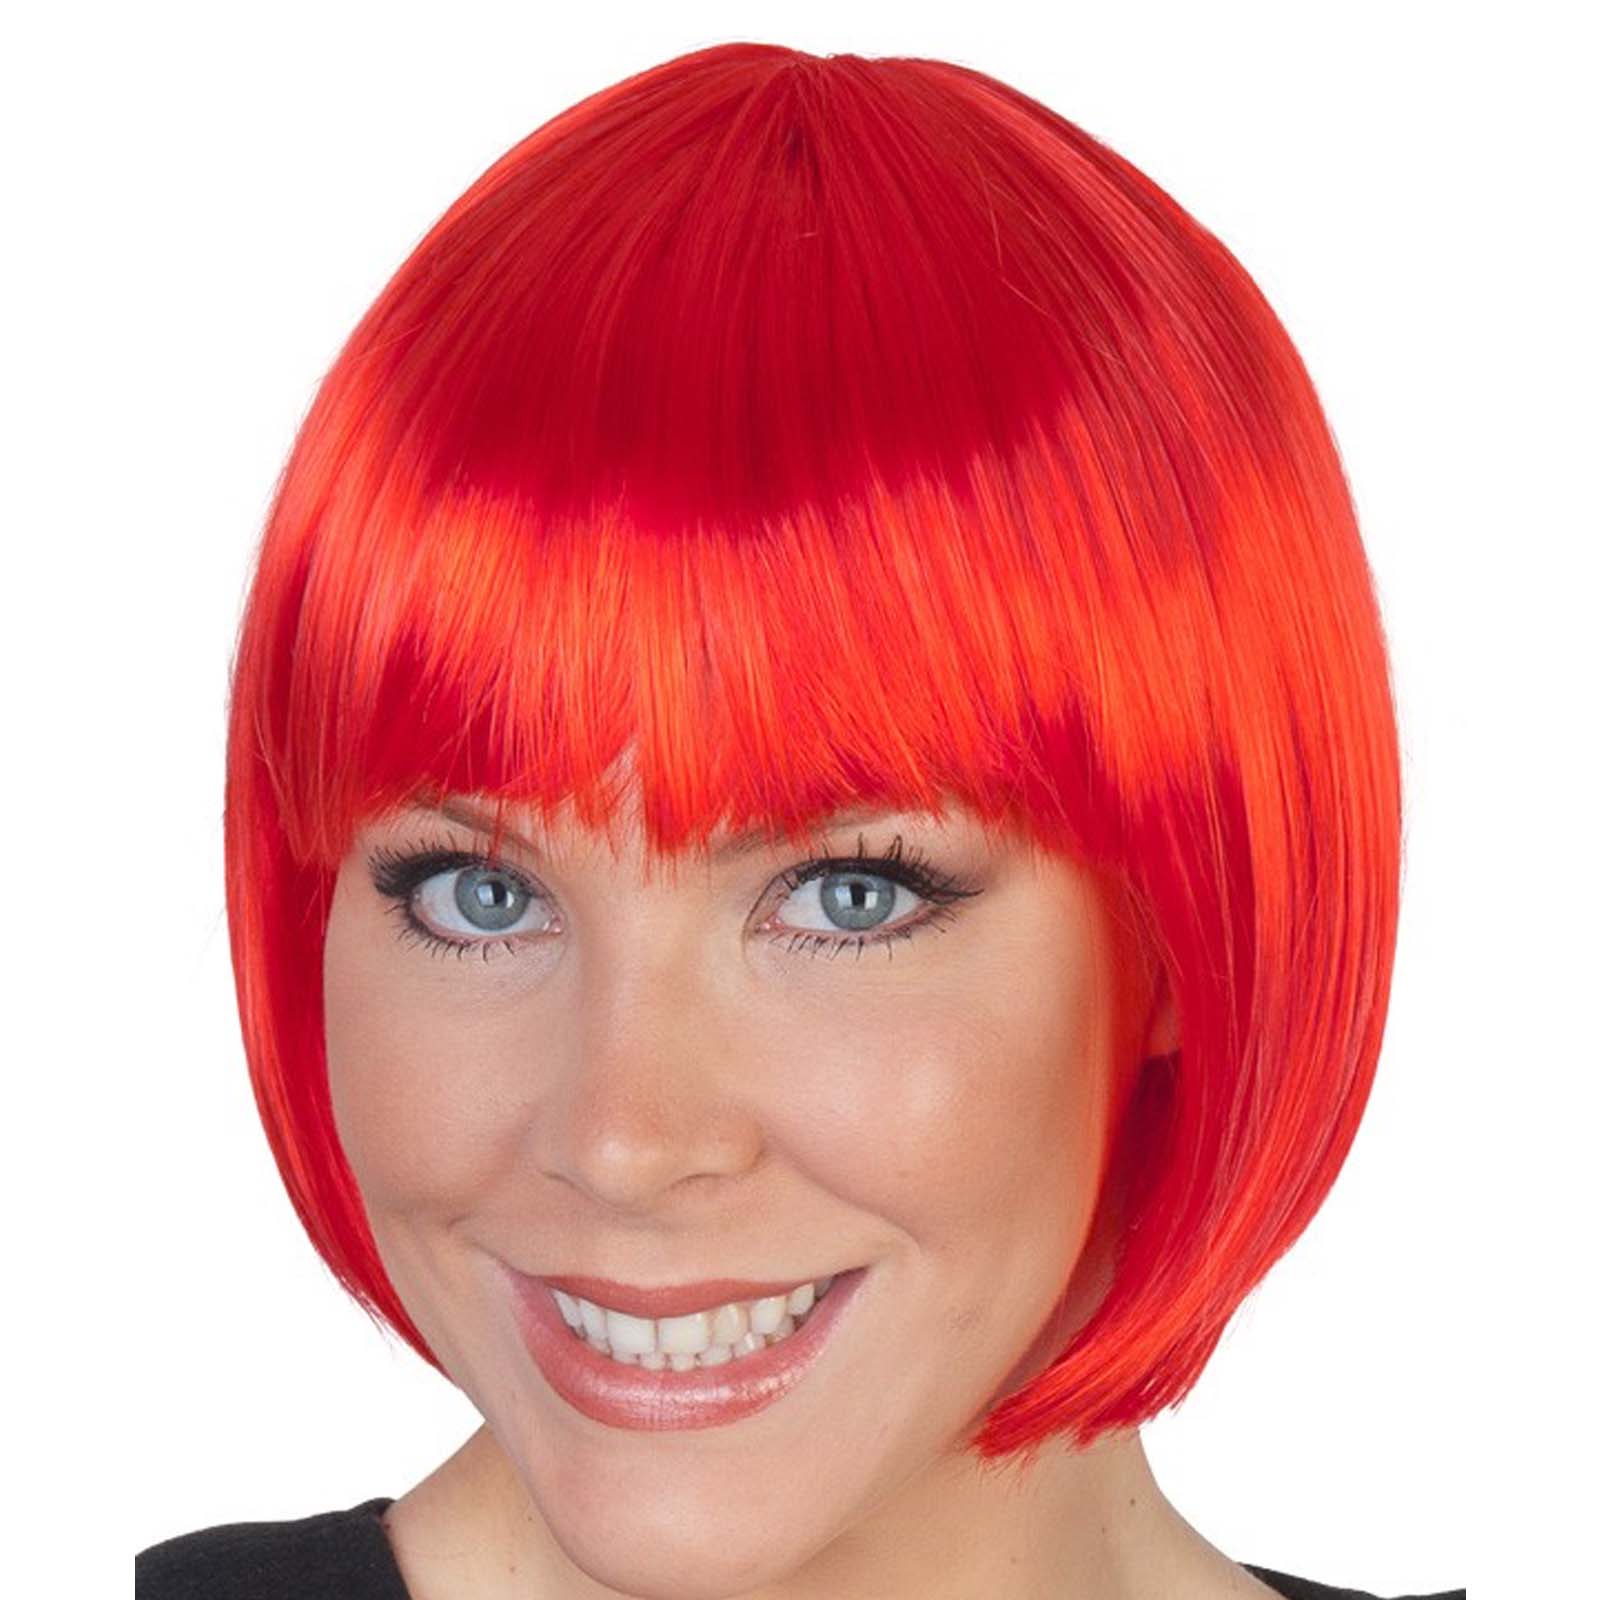 Paige Bob with Fringe Wig - Red.